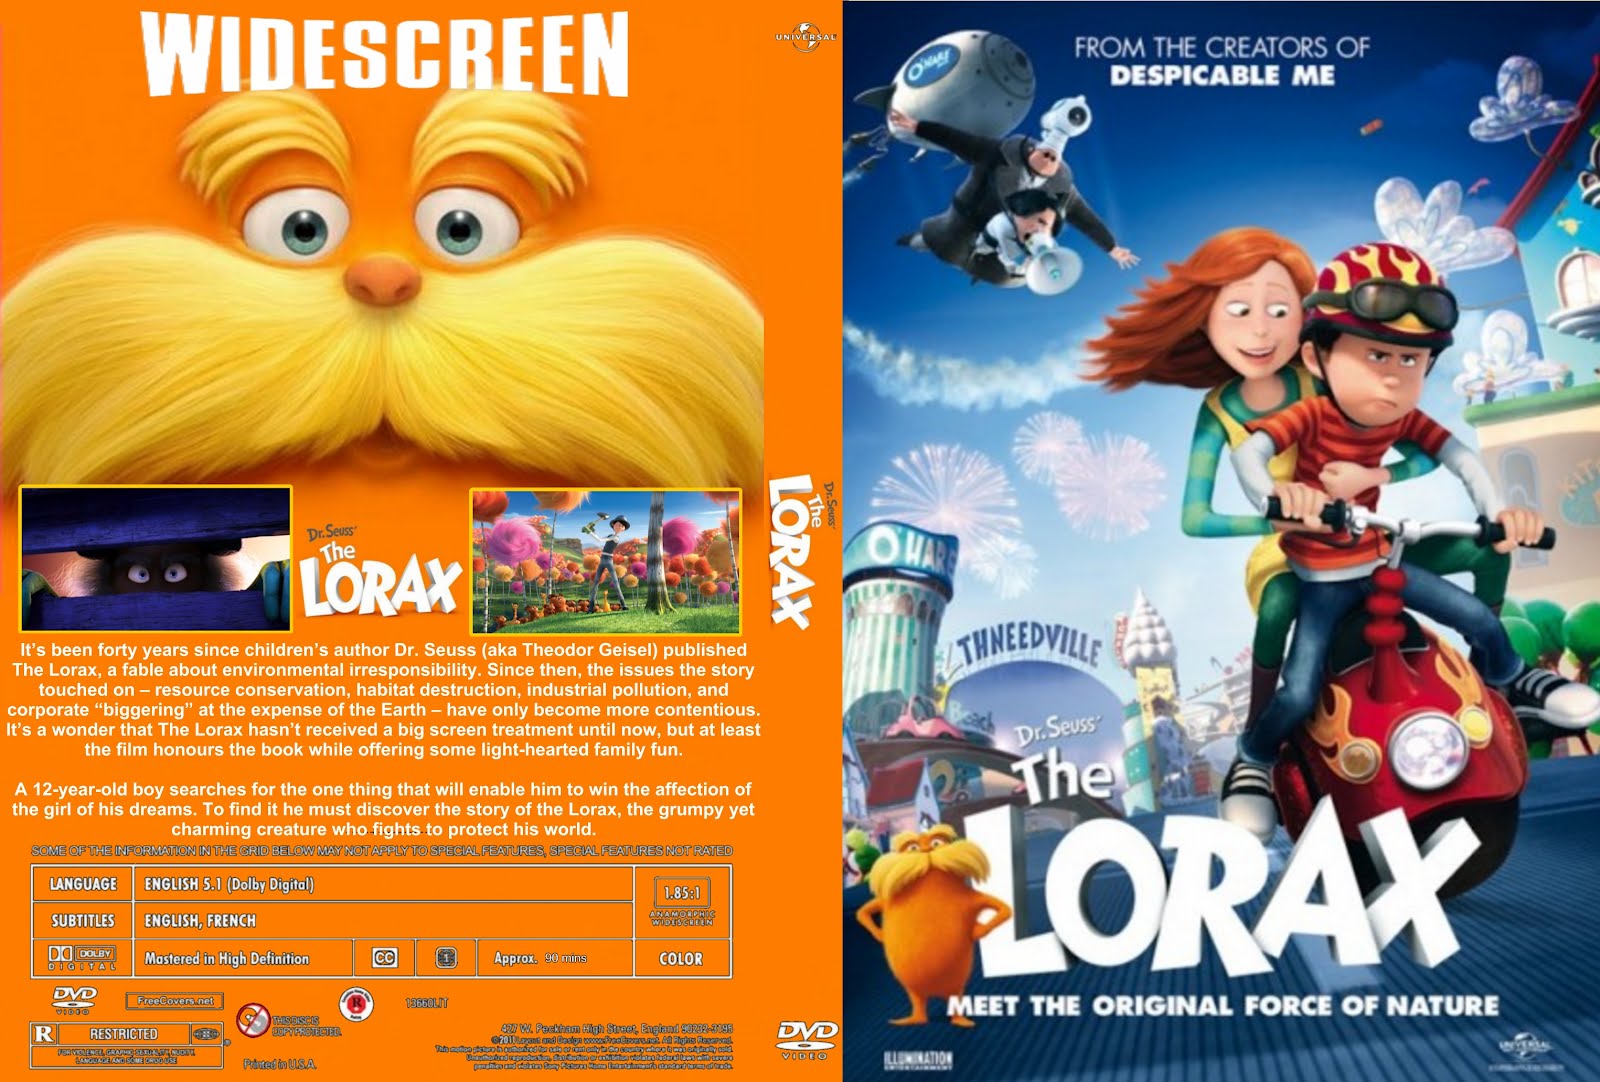 Download Video The Dr Suess The Lorax Full Movie Mp4